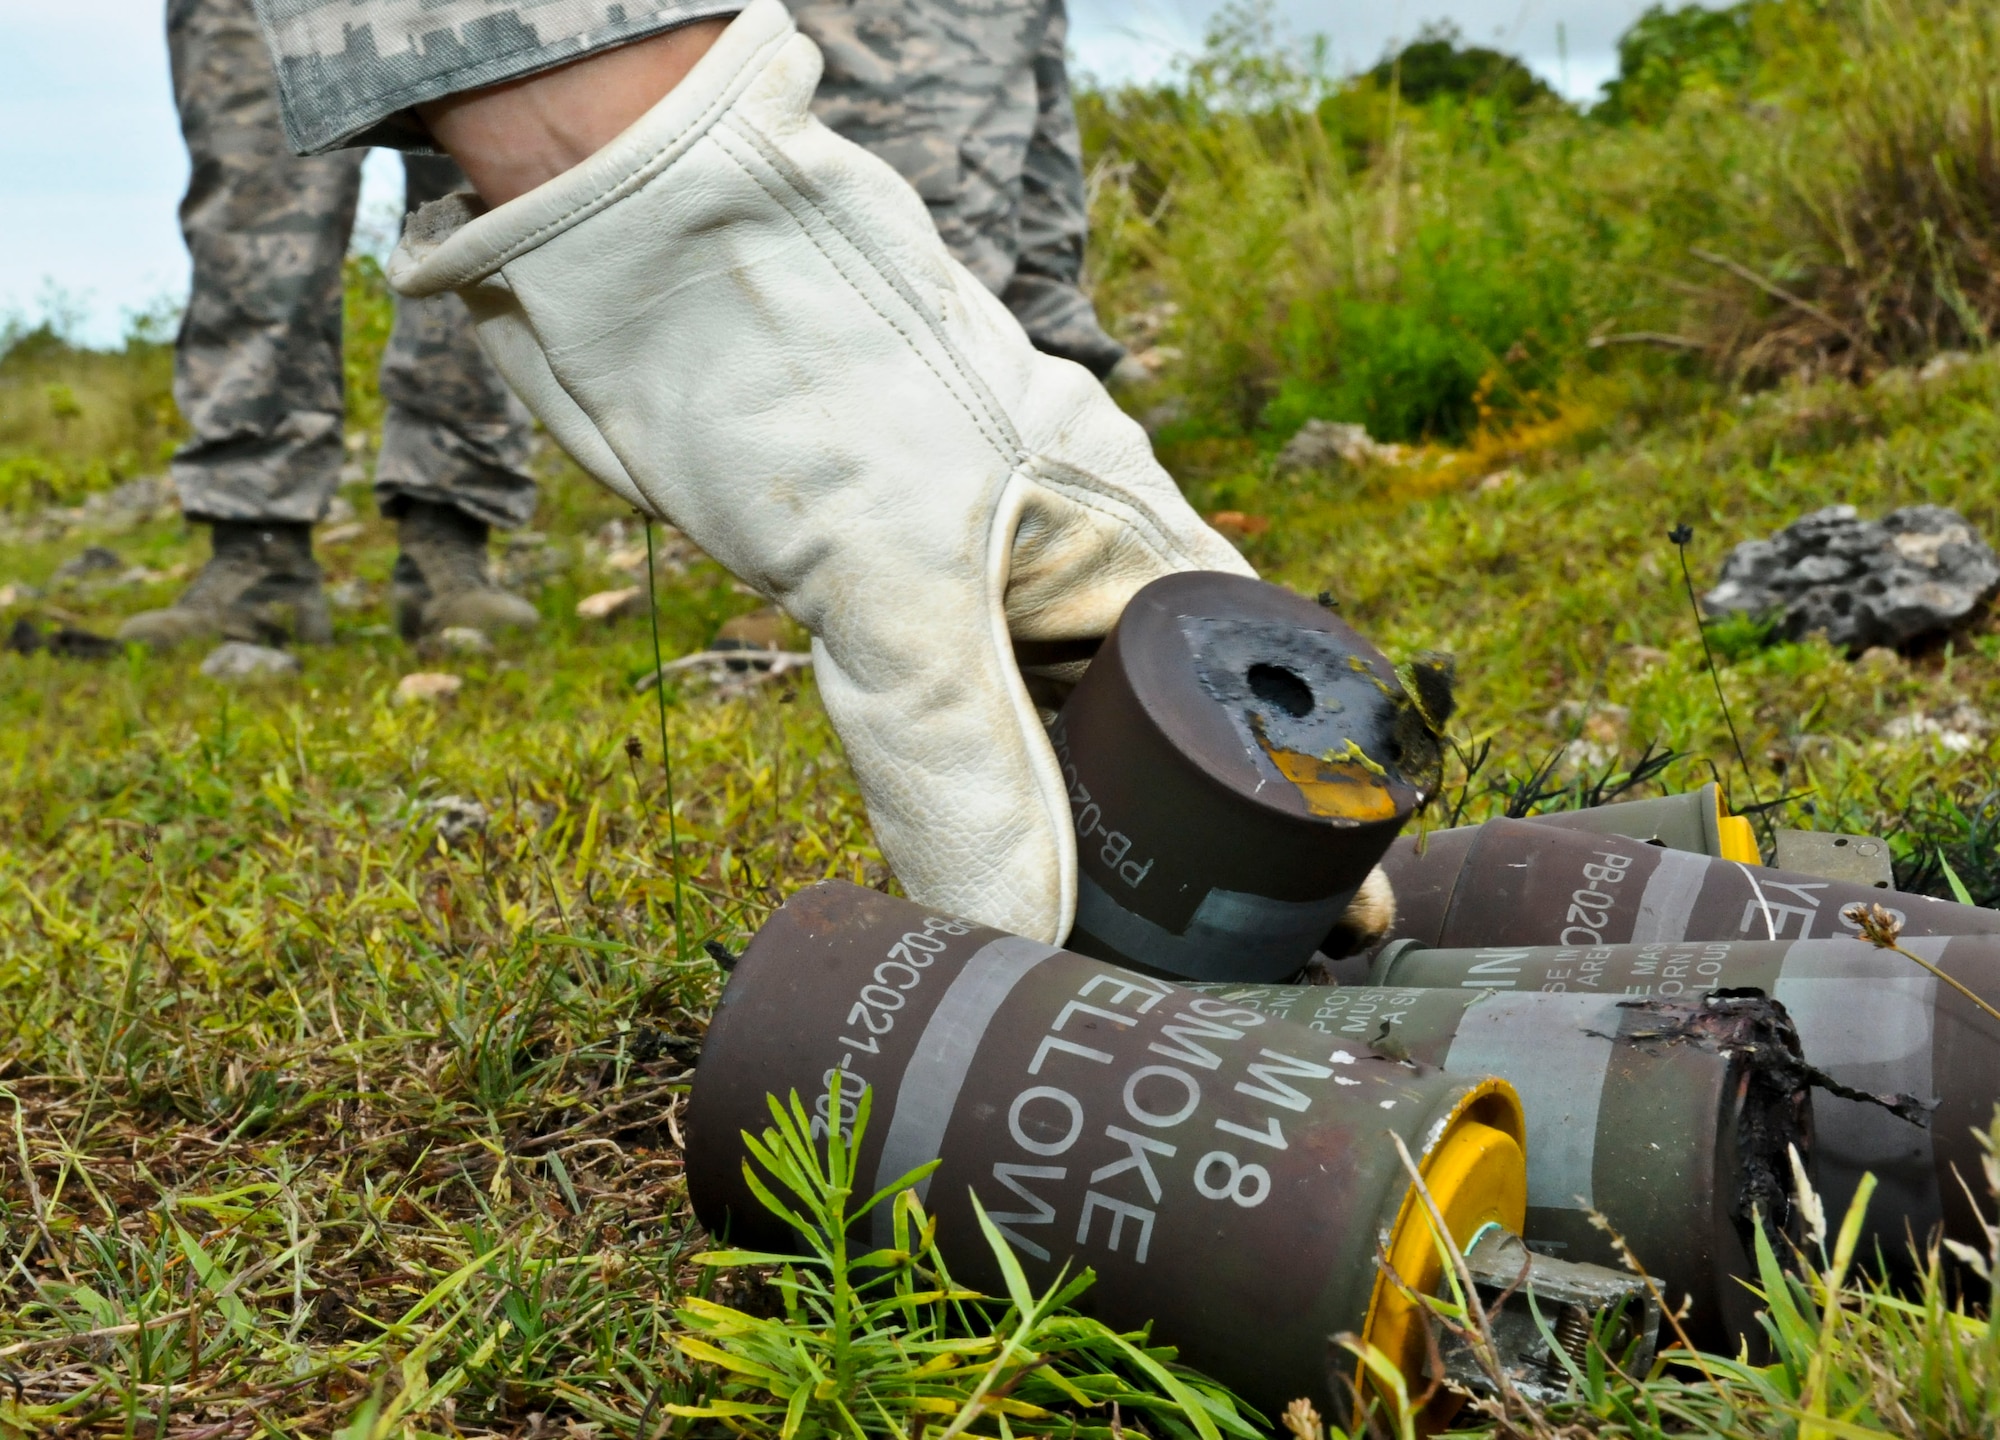 An Airman from the 36th Civil Engineer Squadron Explosive Ordnance Disposal flight piles used smoke grenades after a training exercise, Aug. 26, 2013, on Andersen Air Force Base, Guam. Training with the explosives provides users with necessary knowledge to utilize ground burst simulators and smoke grenades correctly and safely, giving them a sense of reality and comfort before each base exercise. (U.S. Air Force photo by Airman 1st Class Amanda Morris/Released)